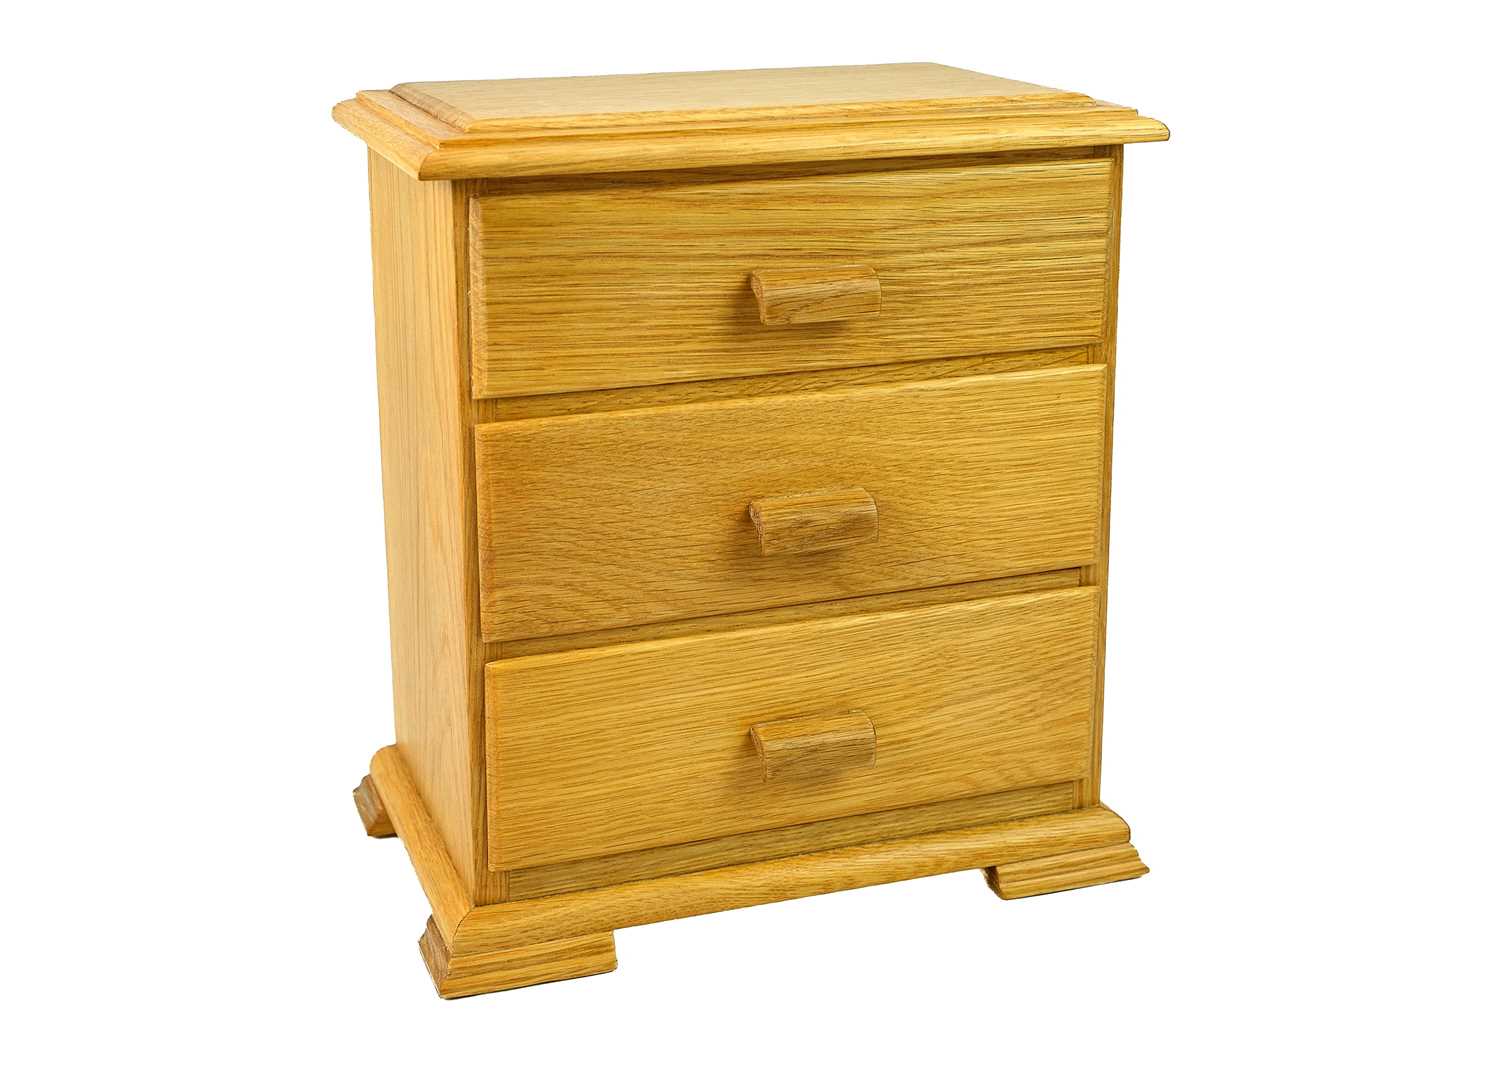 Lot 22 - Prenntek Designs. An oak jewellery box in the form of a chest of drawers